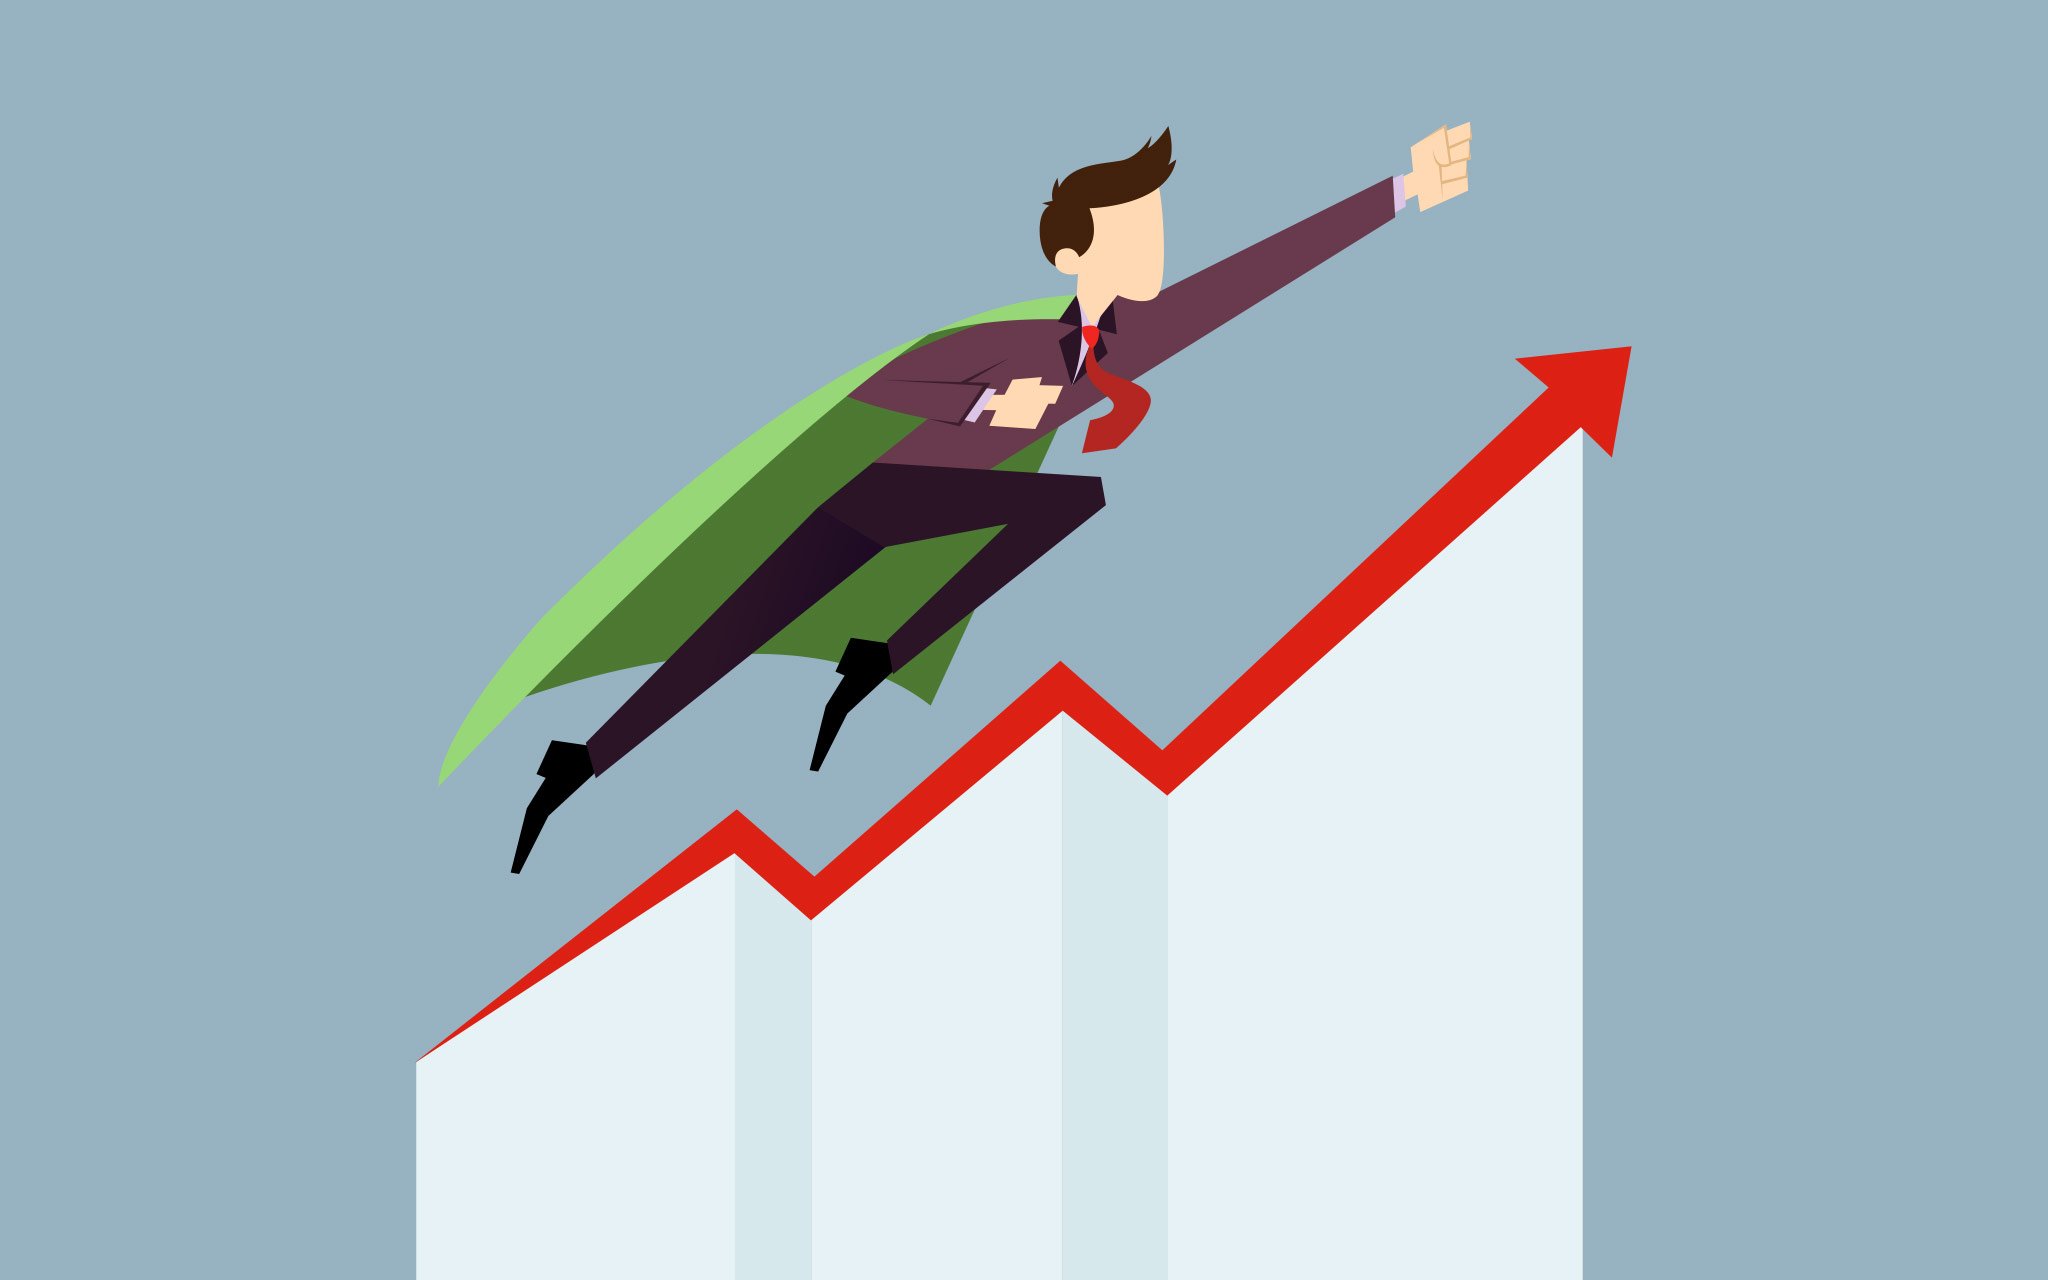 An image of a person soaring through charts with Performance Marketing, which is a way of app marketing.